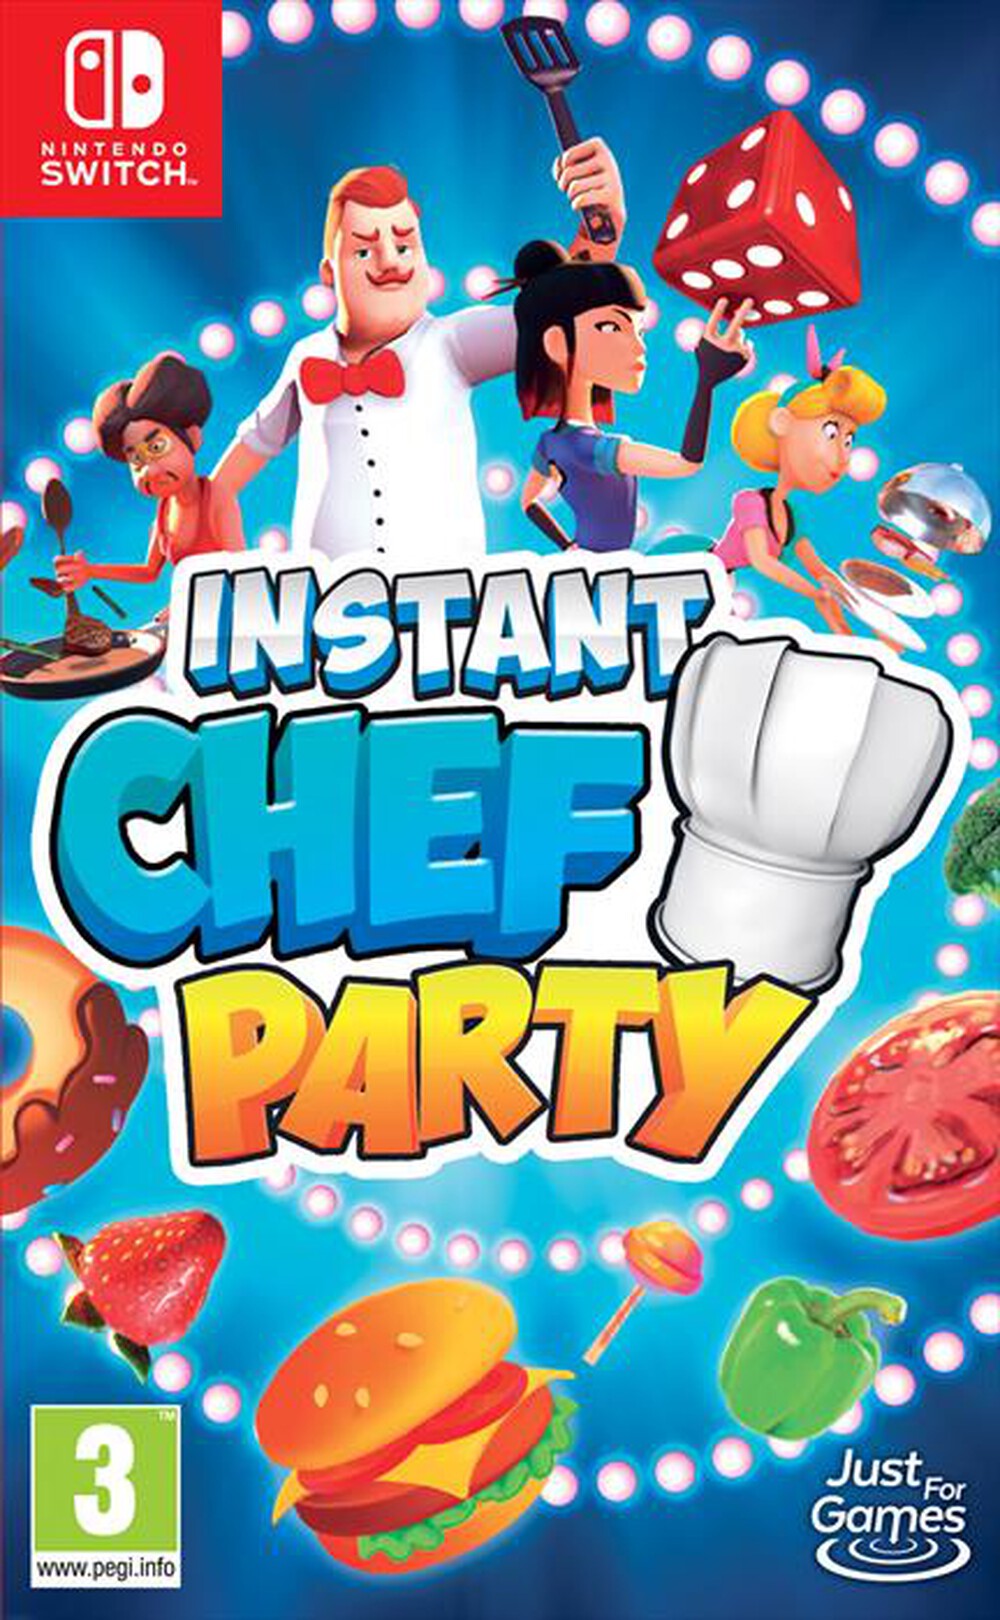 "JUST FOR GAMES - INSTANT CHEF PARTY SWT"